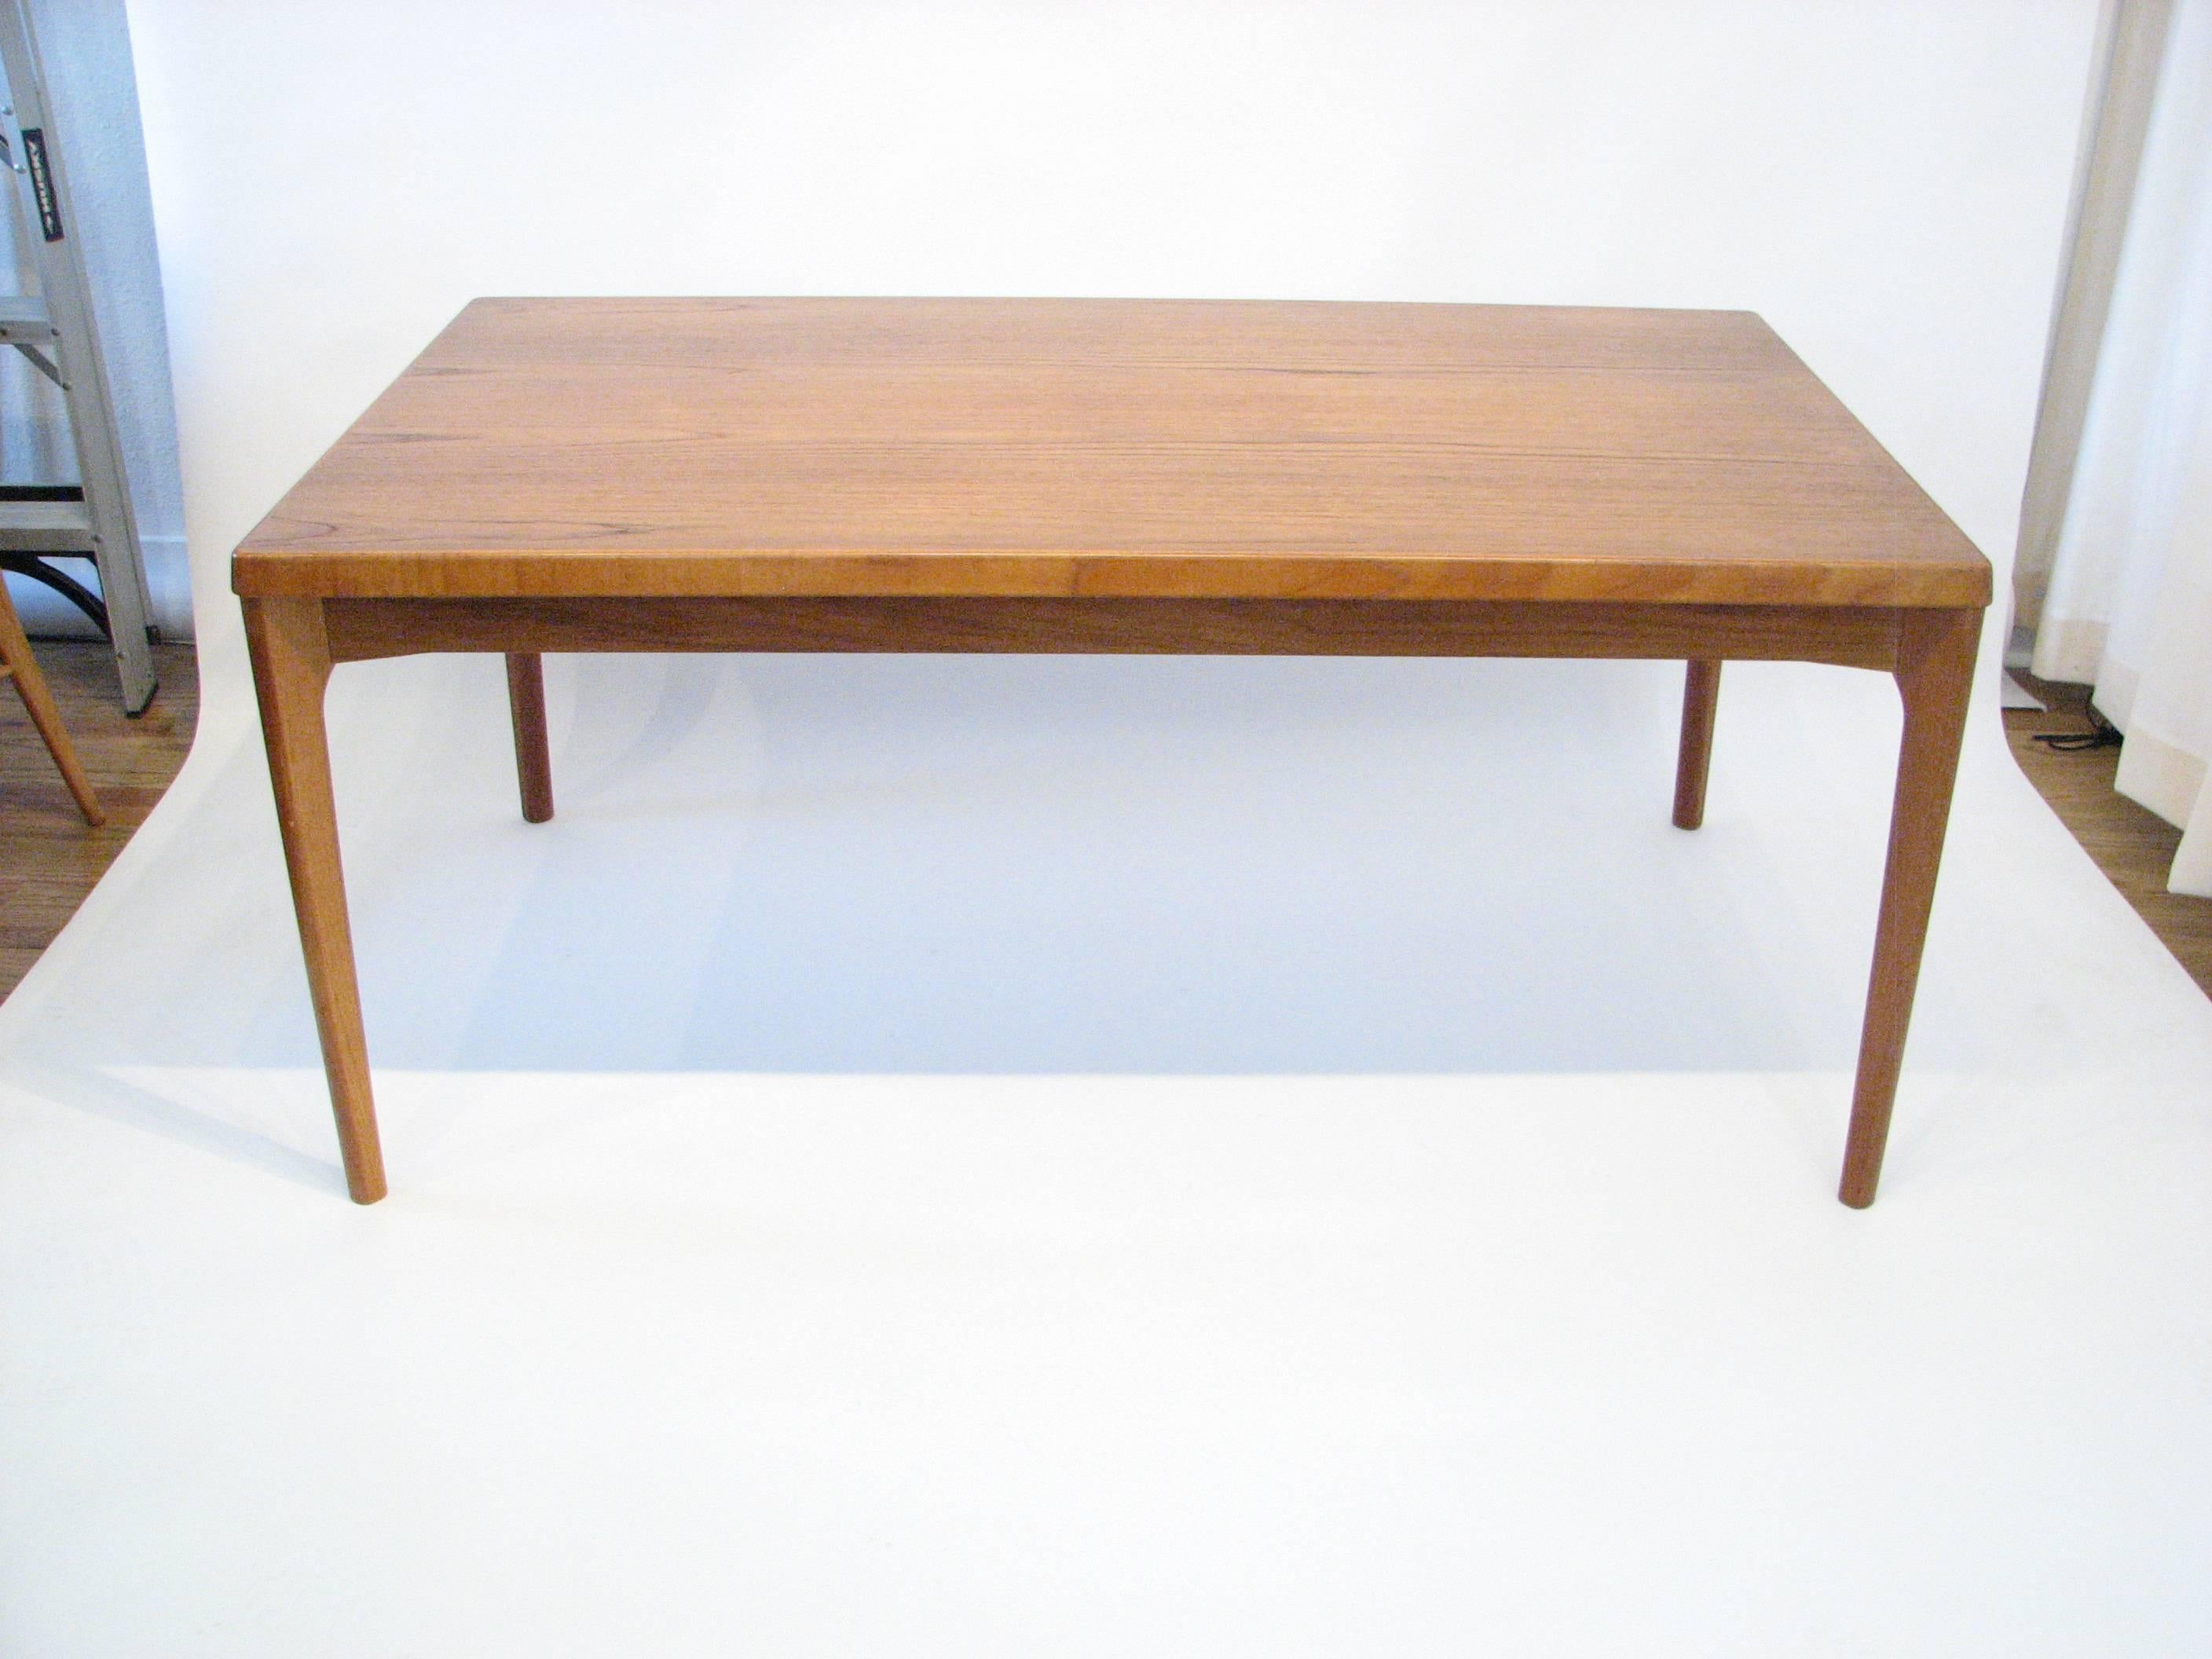 Danish teak dining table with pull-out extension leaves by Henning Kjærnulf for Vejle Stole & Møbelfabrik, 1960s.

Leaves are in pristine condition.  Each leaf adds 21.5 in. in length.

Please Note:  Pickup for this table is in Denver, Colorado.